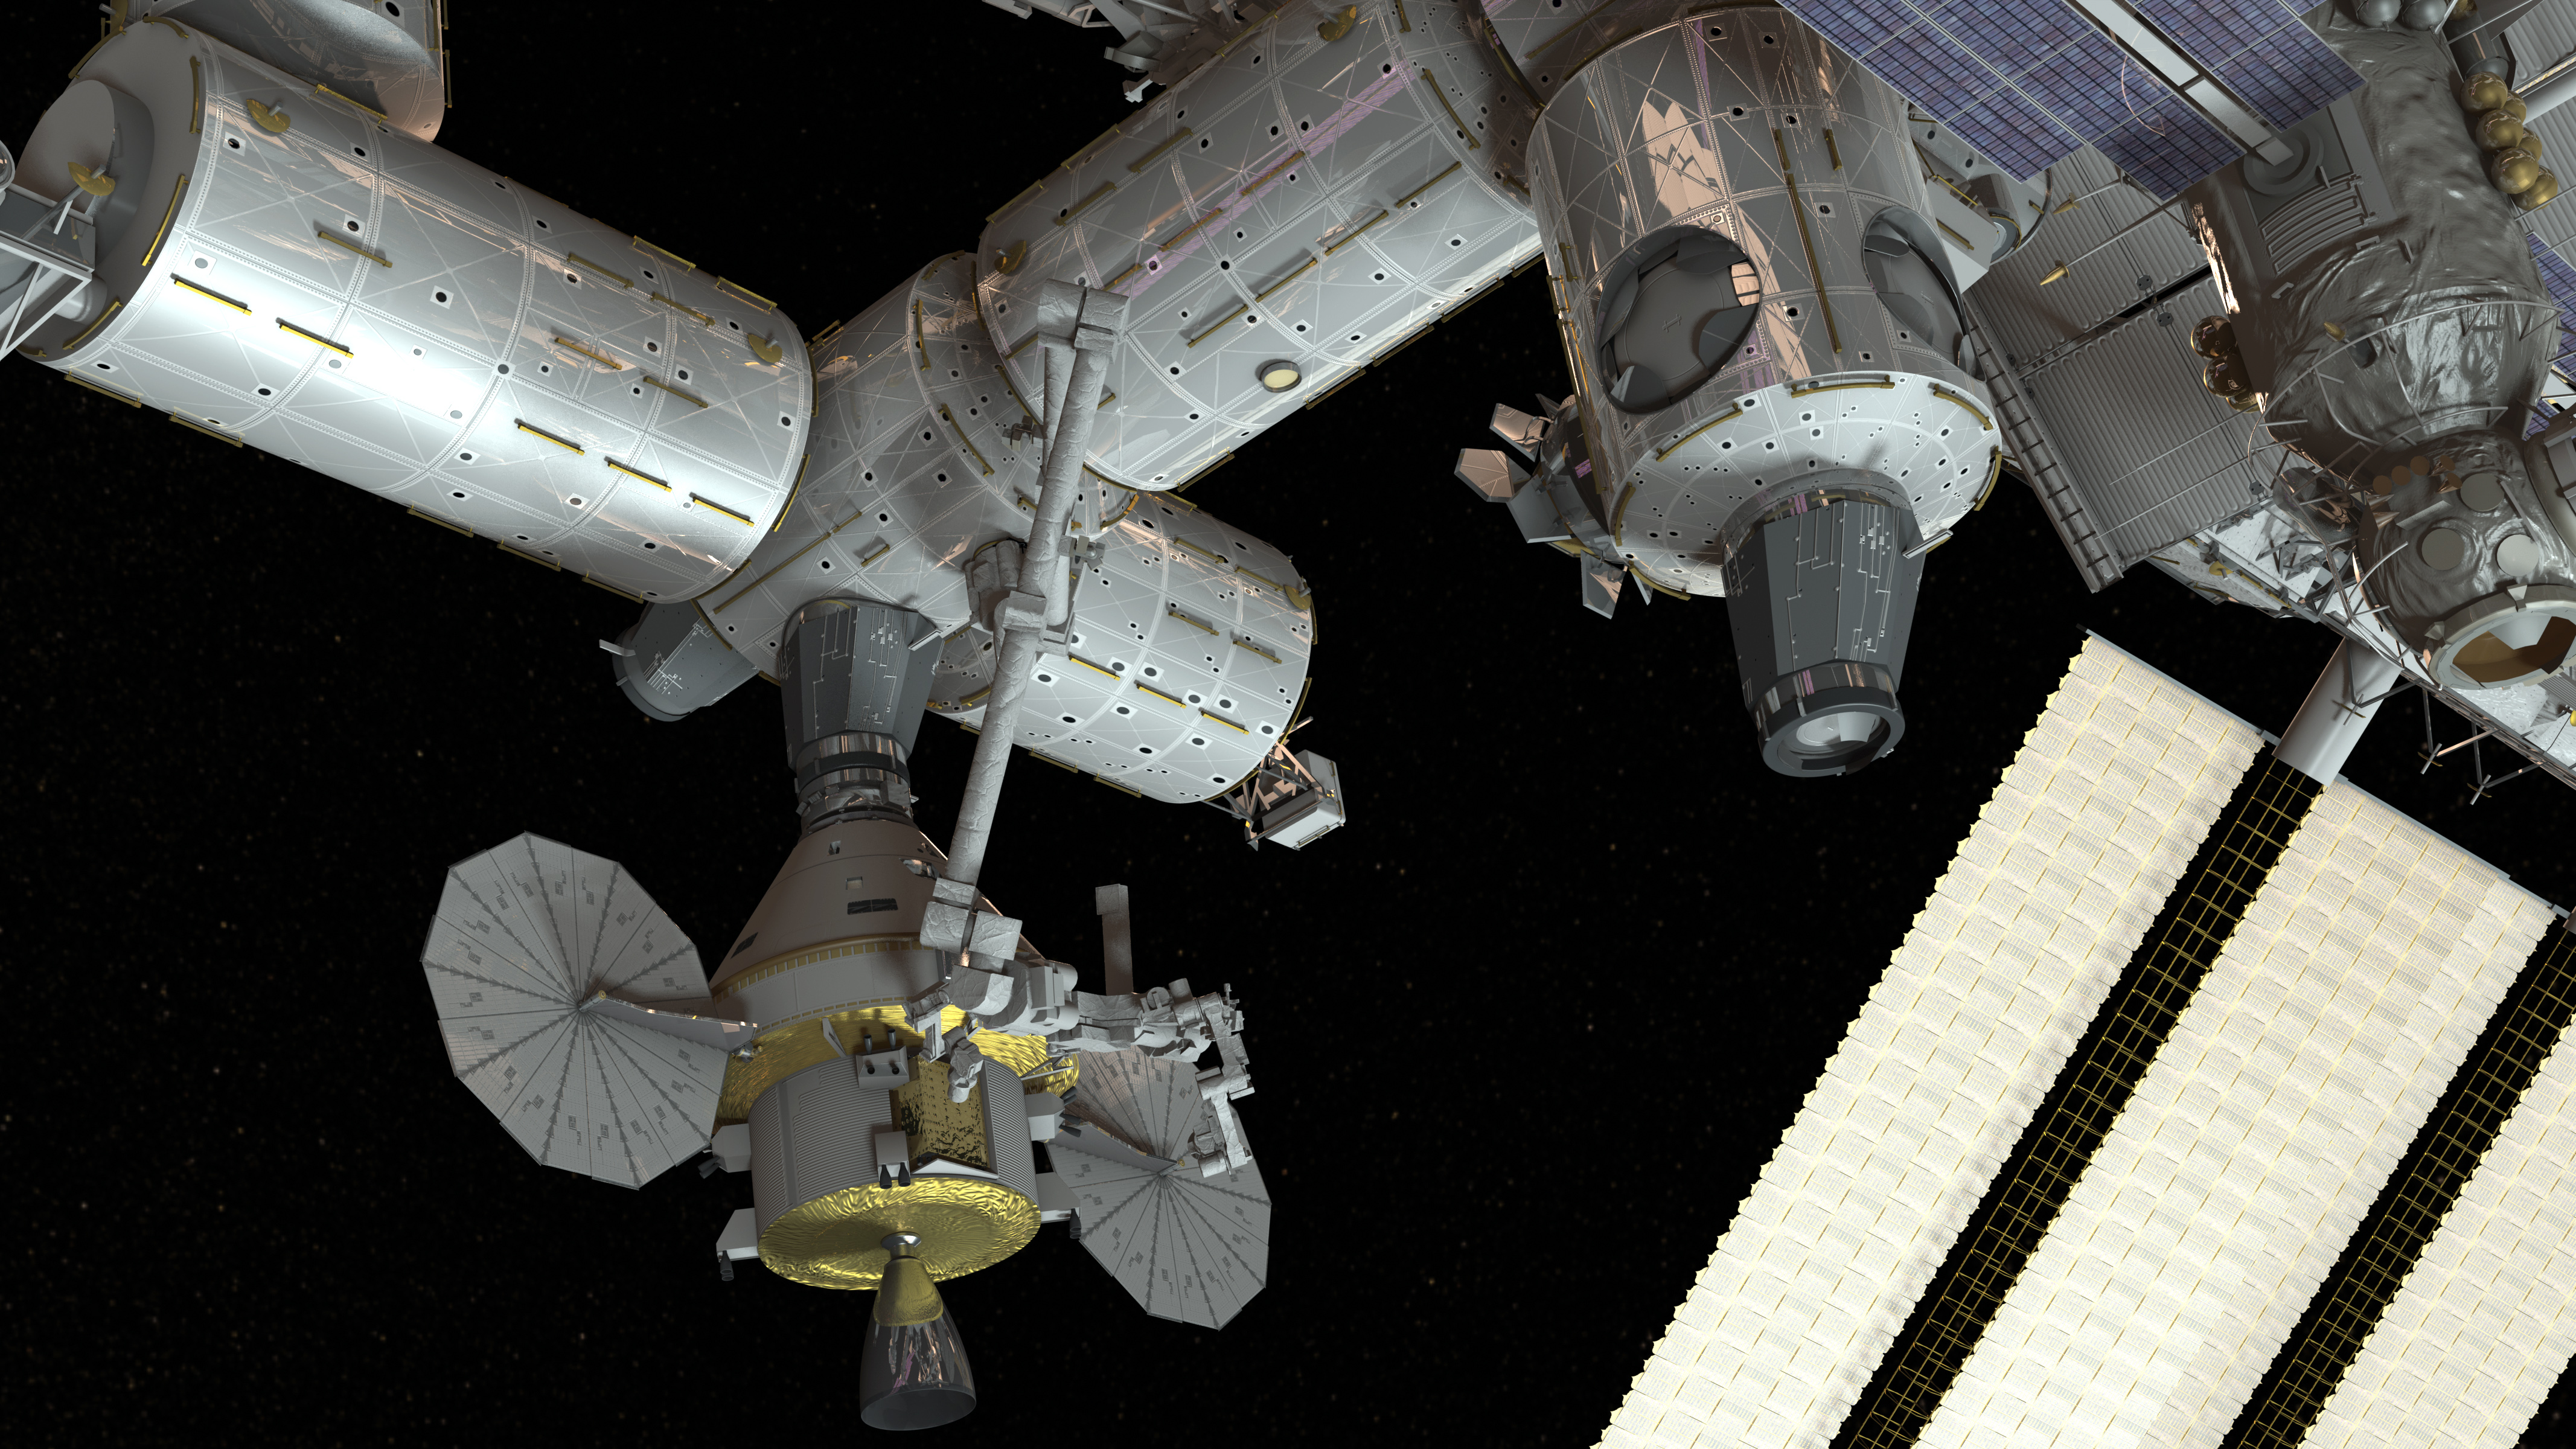 Orion docked to ISS concept